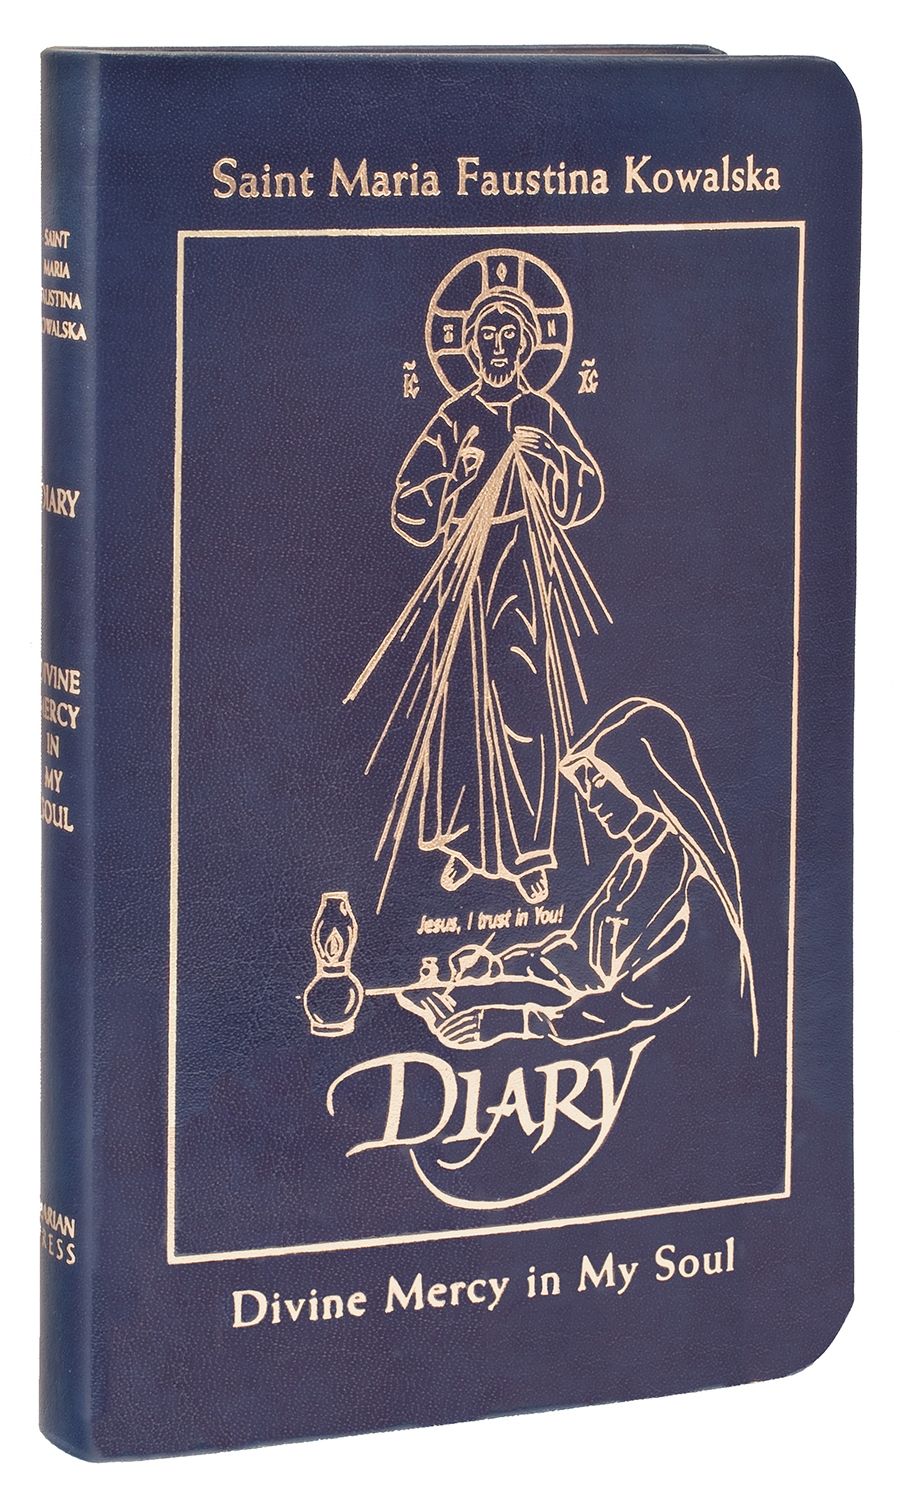 Diary of Saint Maria Faustina Kowalska: Divine Mercy in My Soul [Deluxe Blue Leather]